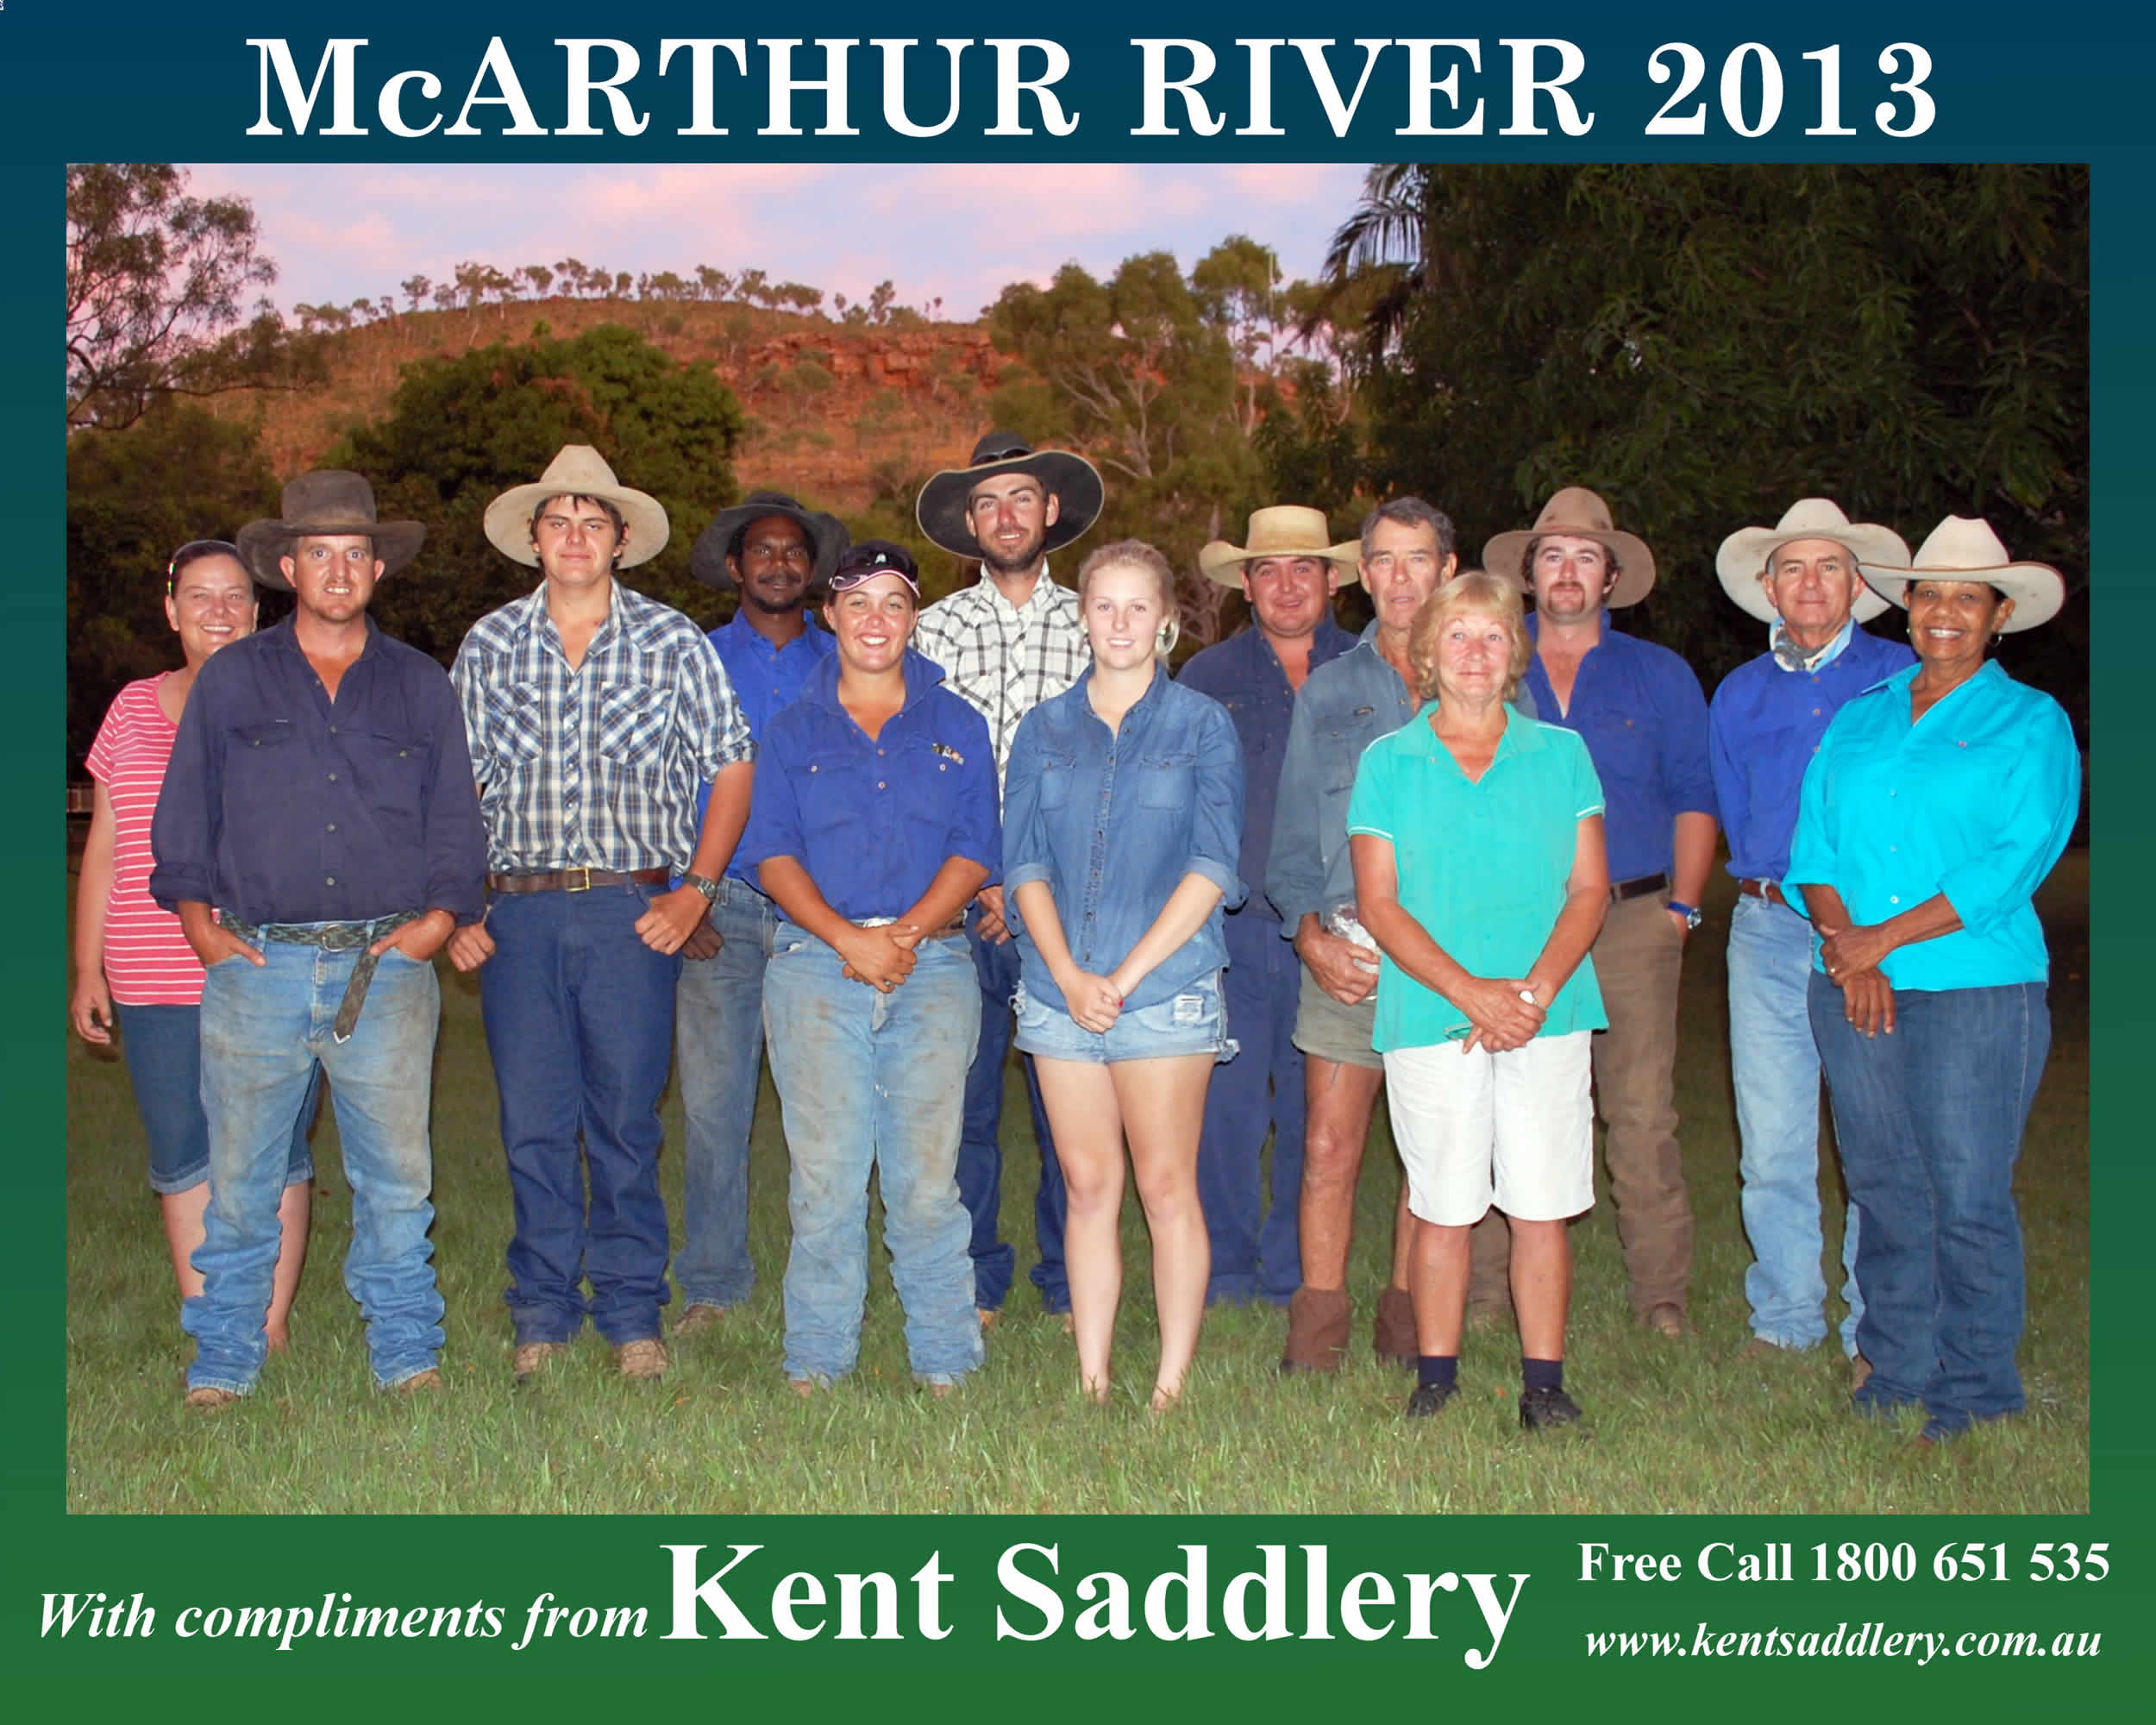 Northern Territory - McArthur River 17